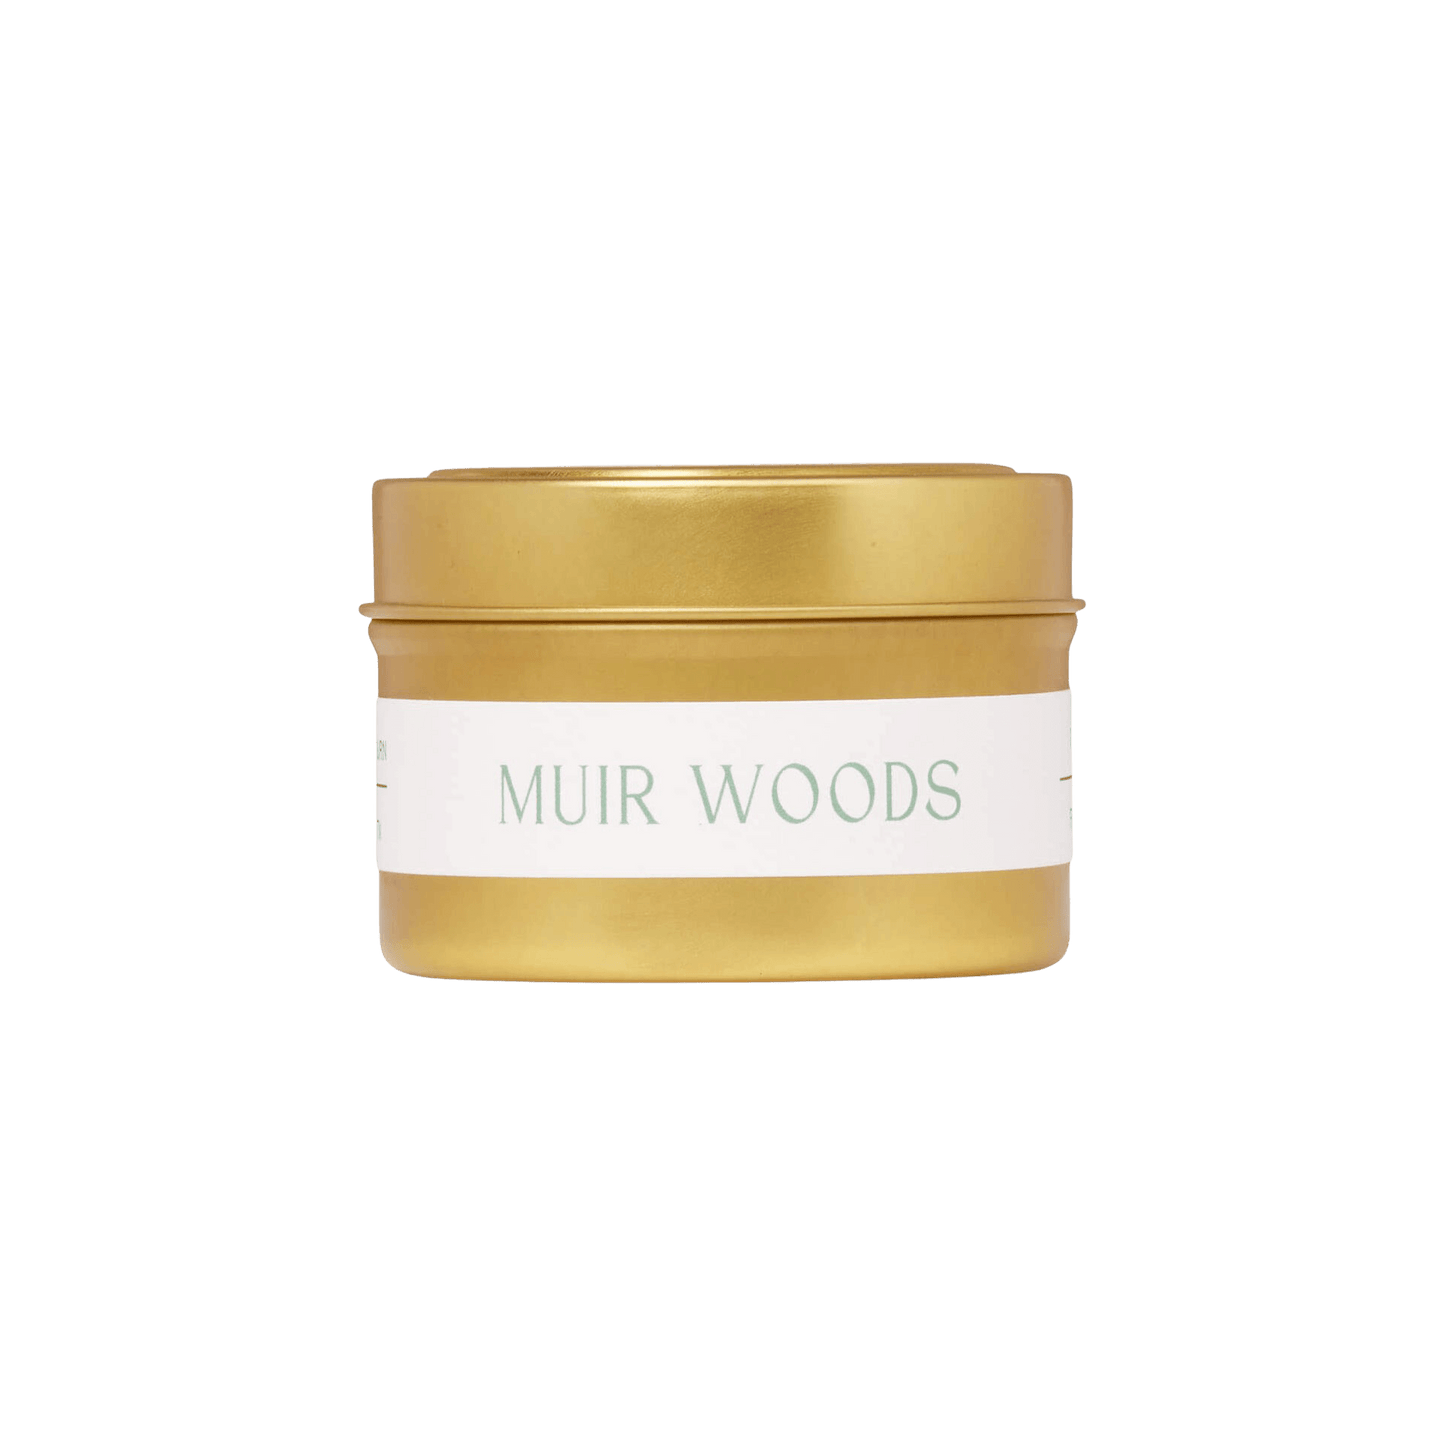 Muir Woods travel candle - the roosevelts candle co